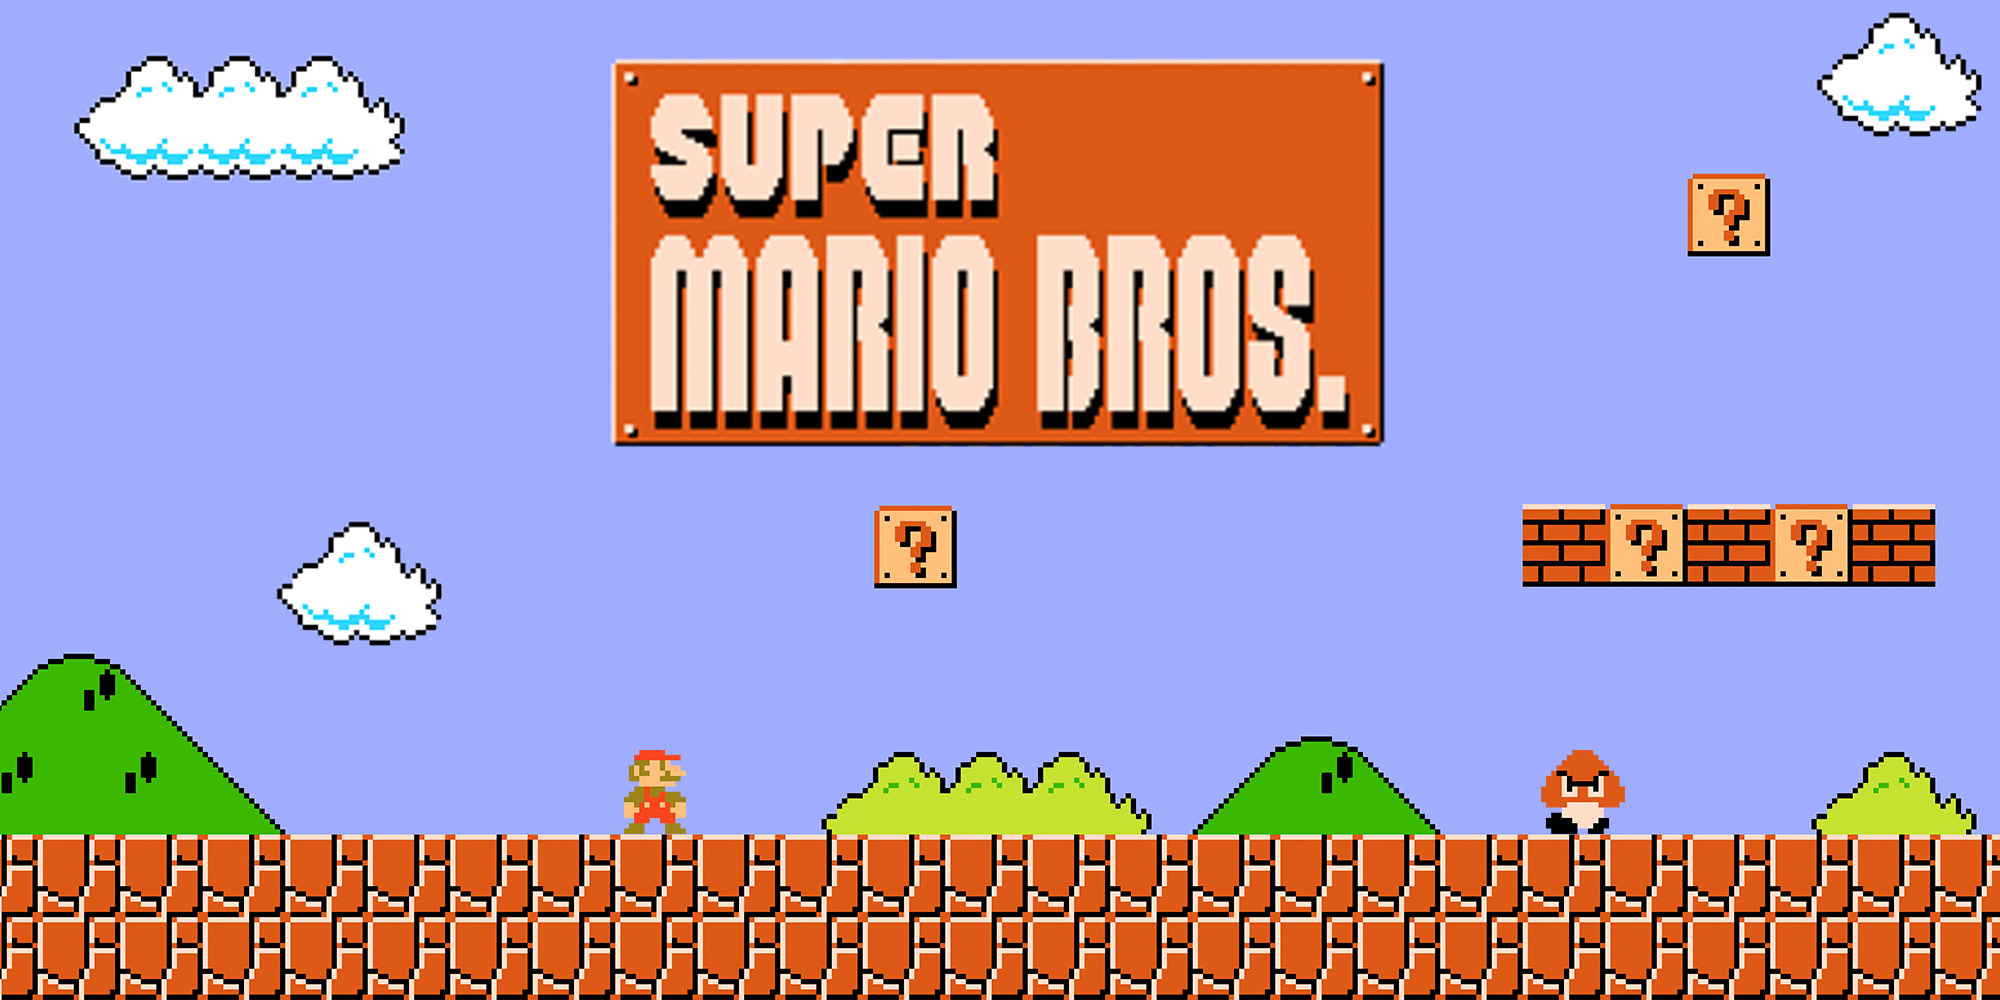 Copy of Super Mario Bros. Becomes Most Expensive Video Game Collectible -  mxdwn Games